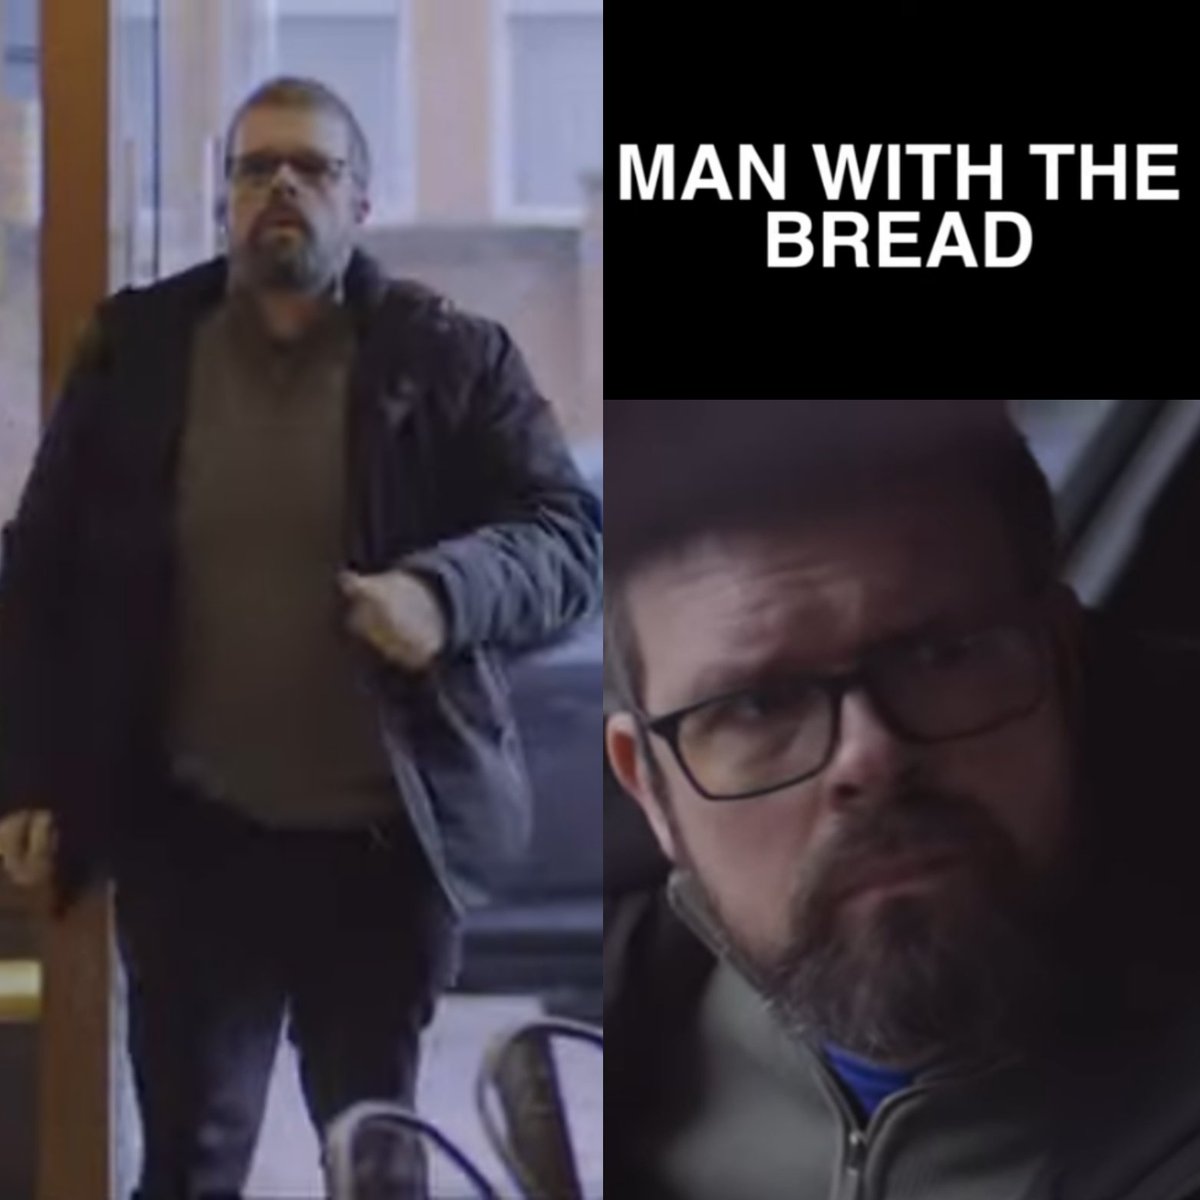 Small roles and actions can make a big difference, as we found out in my latest short film appearance, playing a clumsy restaurant customer in 'The Man & The Bread', out now on the Hadiethshop YT channel. Check out the link below to see what I mean! youtu.be/LCeUULqiP4A?si…